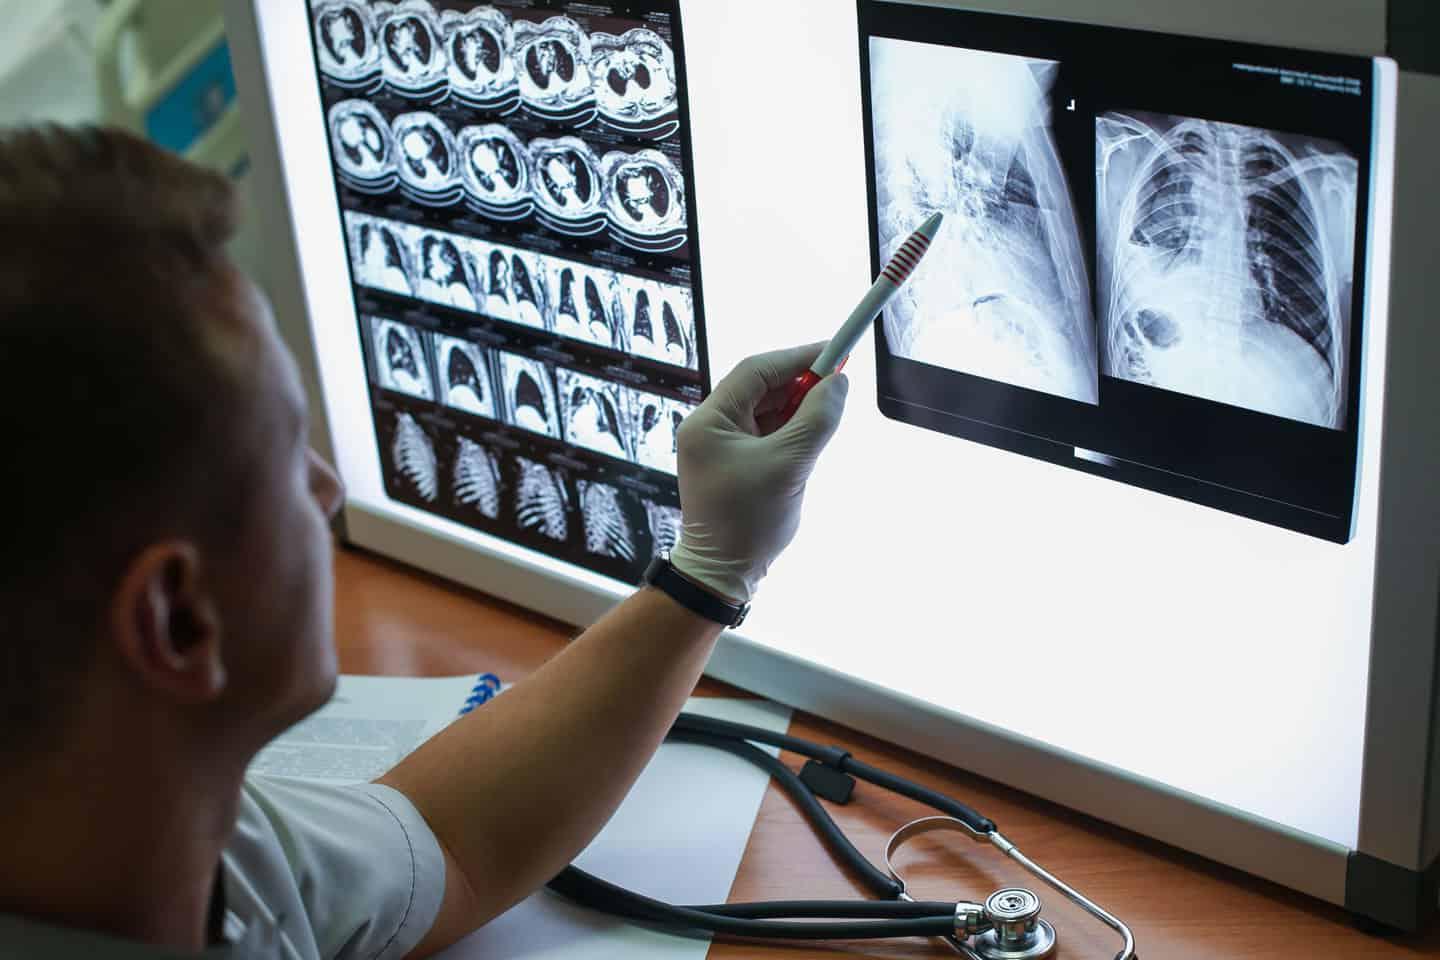 doctor reviewing x-rays